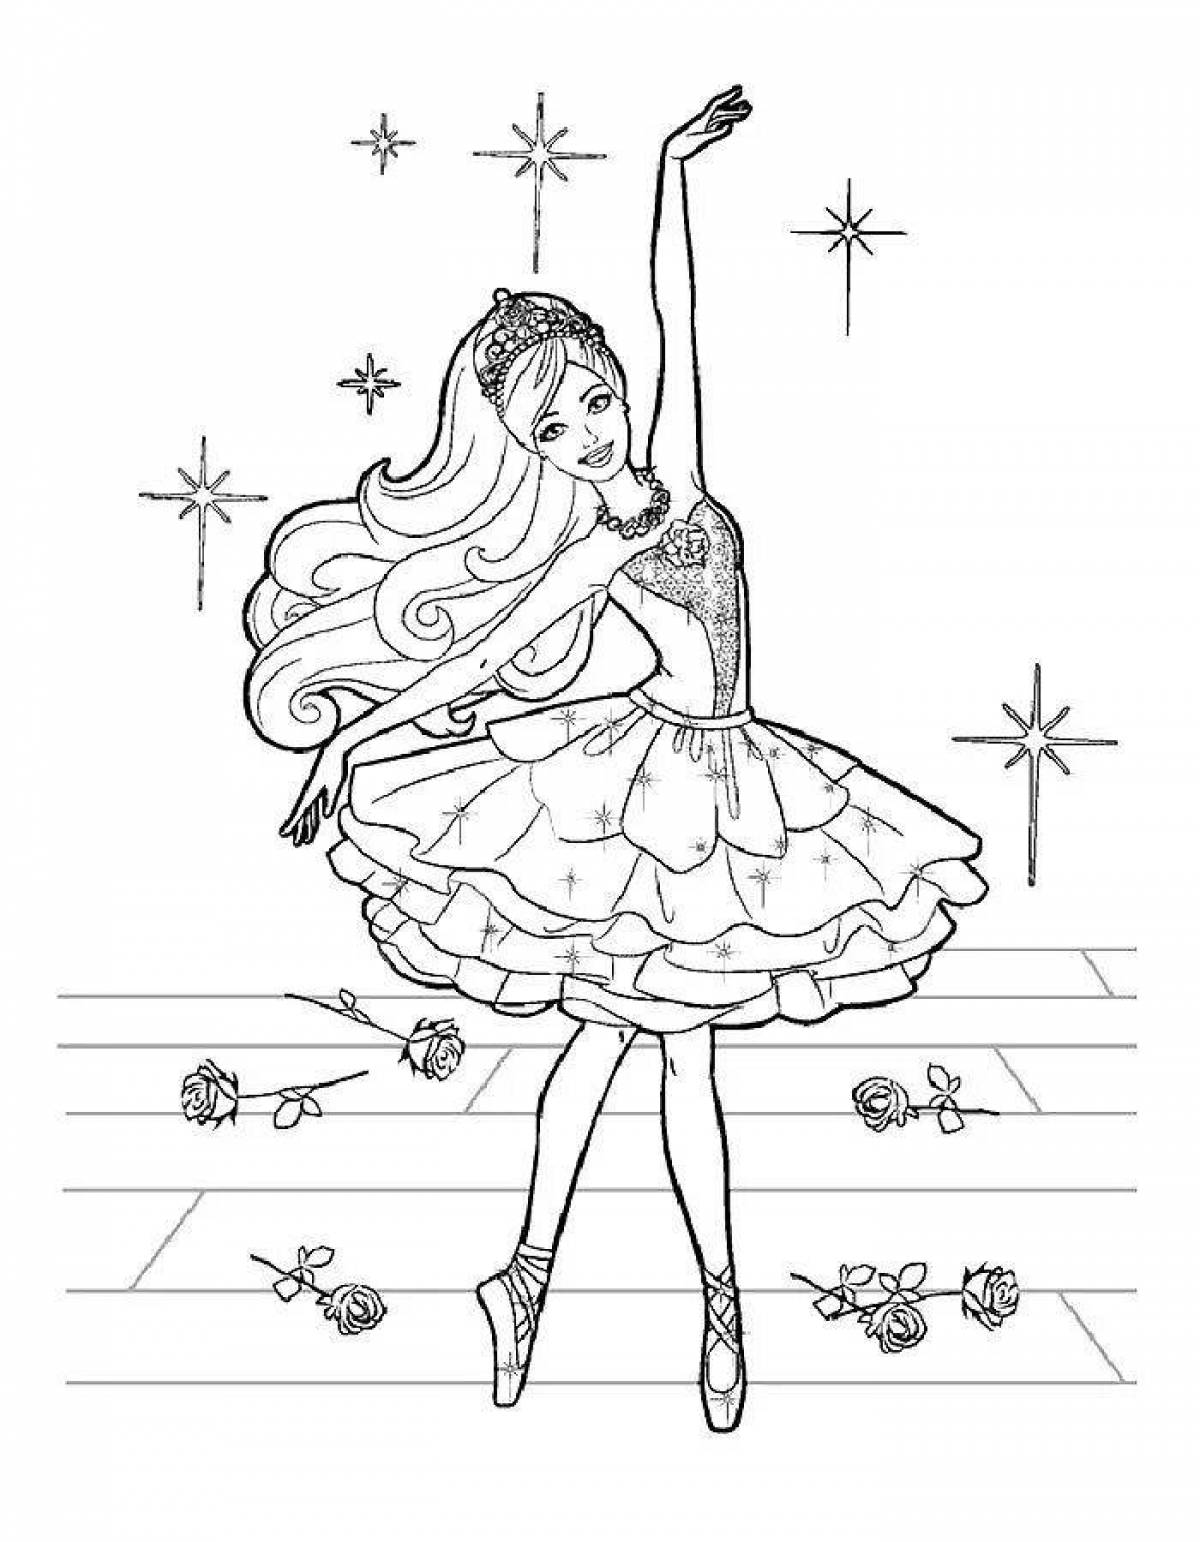 Festive ballerina coloring pages for girls